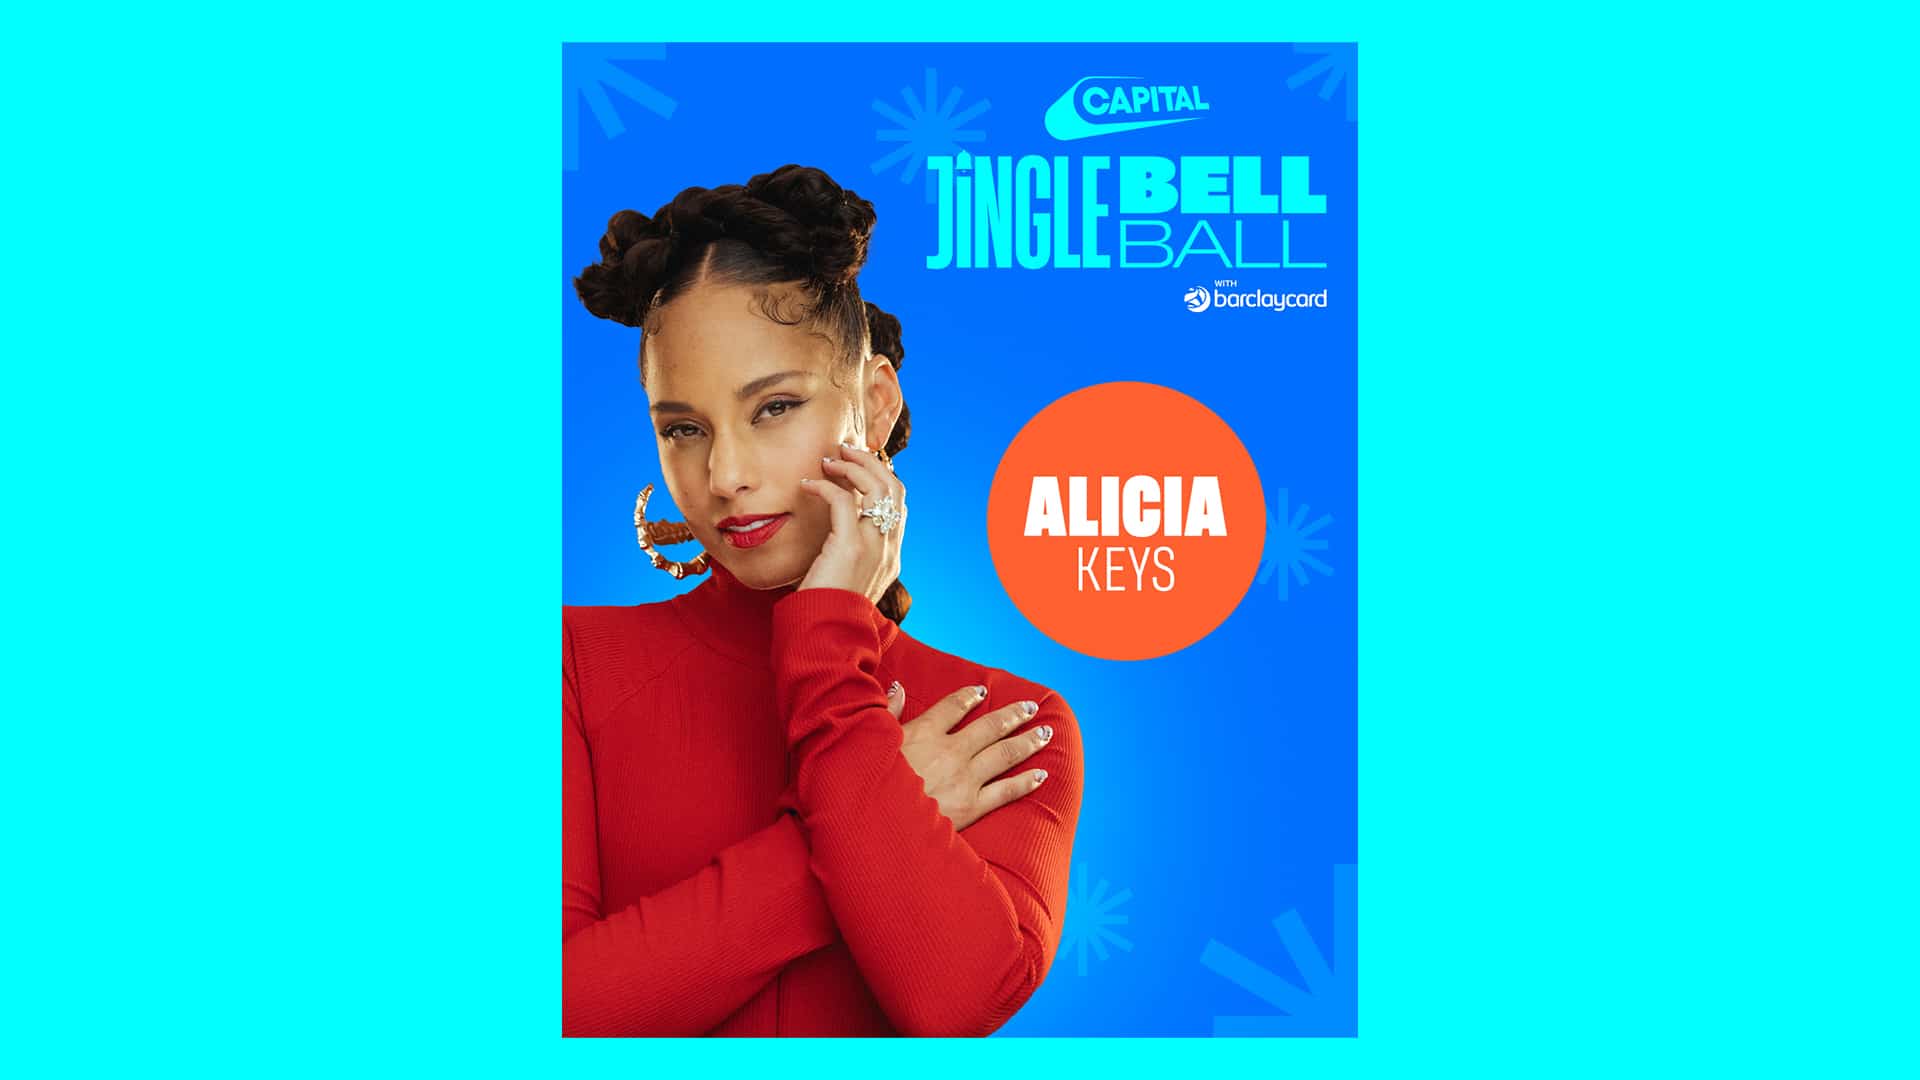 Alicia Keys to play both nights of Capital’s Jingle Bell Ball with Barclaycard